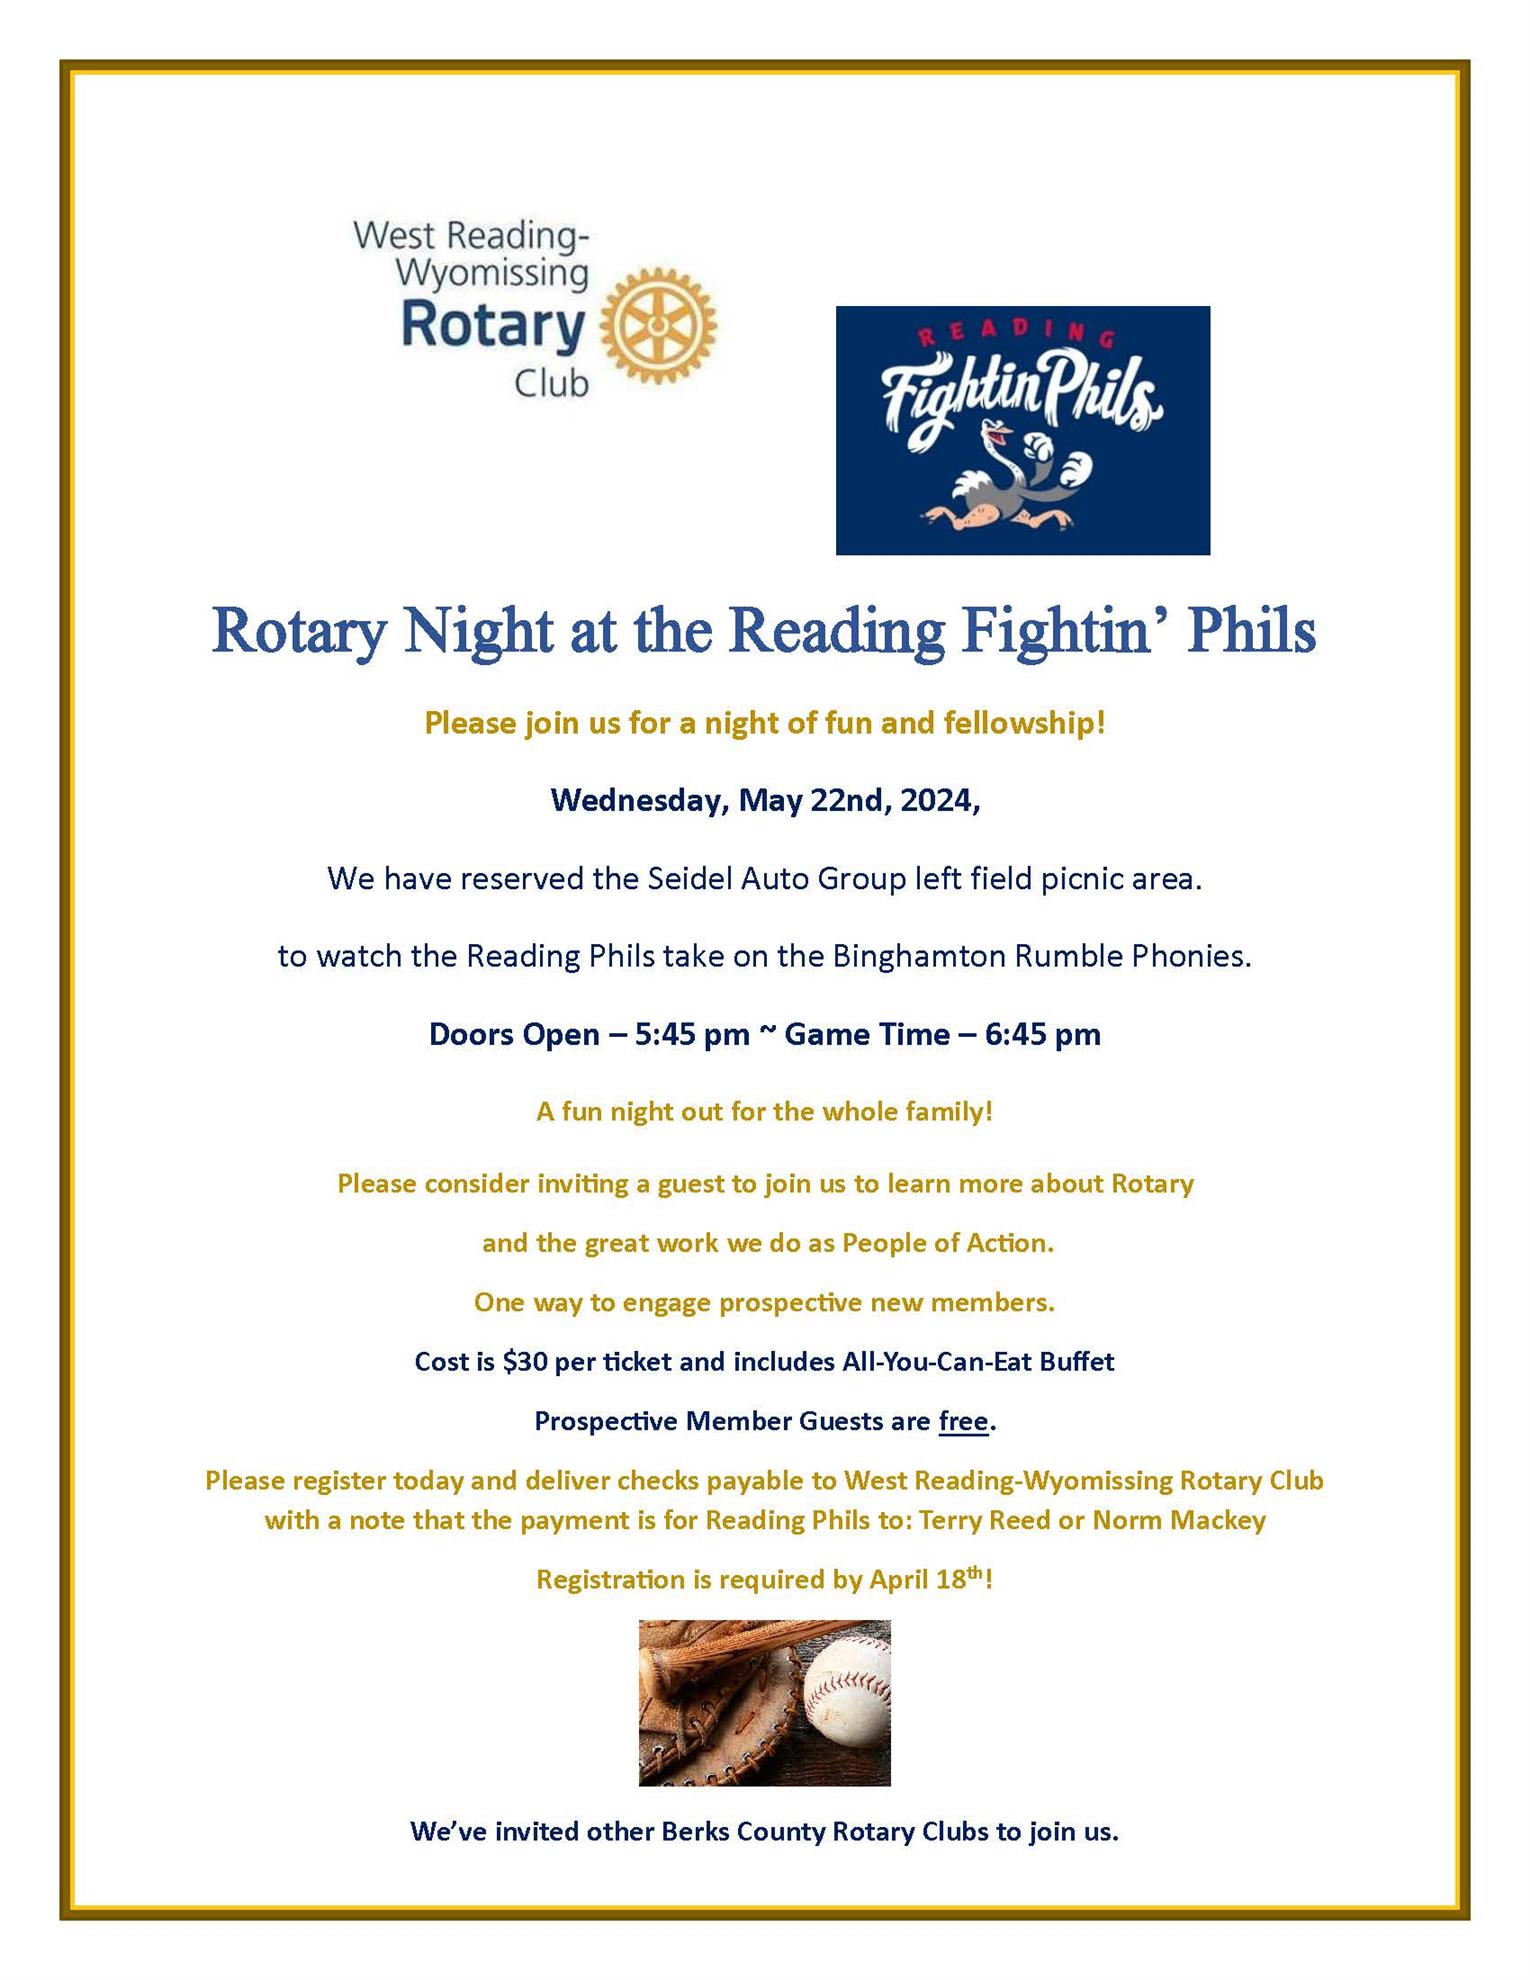 Reading Phillies game with Berks County Rotarians